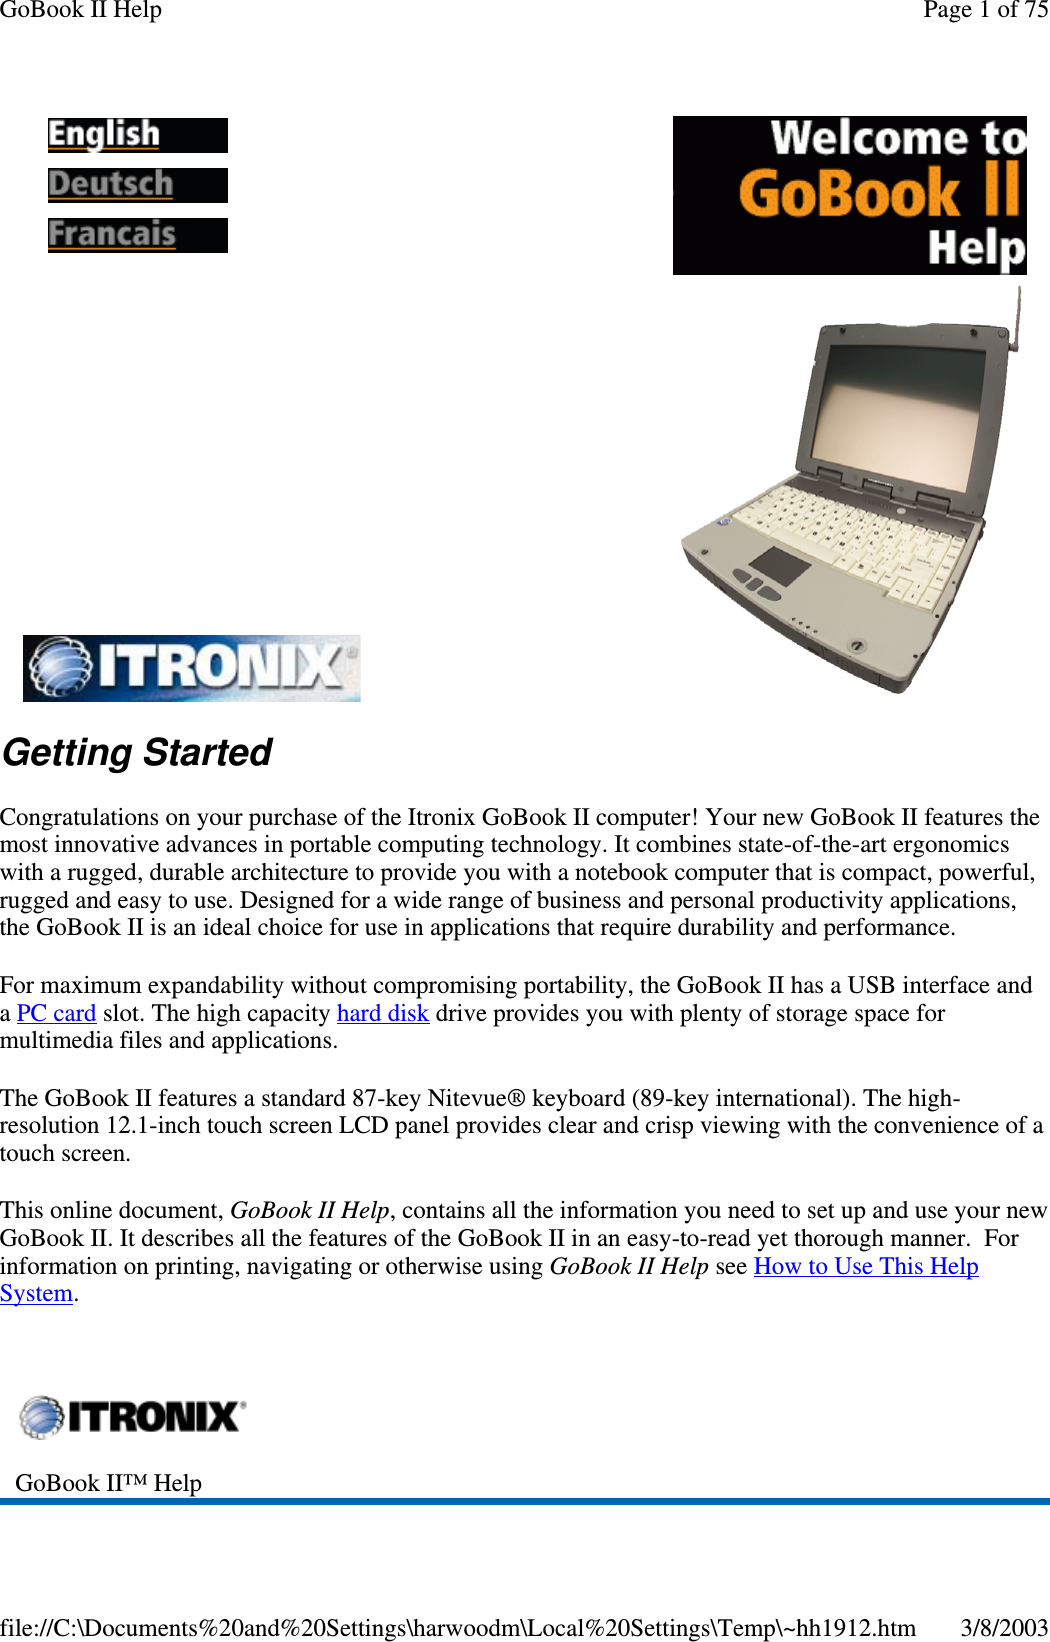 Getting StartedCongratulations on your purchase of the Itronix GoBook II computer! Your new GoBook II features themost innovative advances in portable computing technology. It combines state-of-the-art ergonomicswith a rugged, durable architecture to provide you with a notebook computer that is compact, powerful,rugged and easy to use. Designed for a wide range of business and personal productivity applications,the GoBook II is an ideal choice for use in applications that require durability and performance.For maximum expandability without compromising portability, the GoBook II has a USB interface andaPC card slot. The high capacity hard disk drive provides you with plenty of storage space formultimedia files and applications.The GoBook II features a standard 87-key Nitevue® keyboard (89-key international). The high-resolution 12.1-inch touch screen LCD panel provides clear and crisp viewing with the convenience of atouch screen.This online document, GoBook II Help, contains all the information you need to set up and use your newGoBook II. It describes all the features of the GoBook II in an easy-to-read yet thorough manner. Forinformation on printing, navigating or otherwise using GoBook II Help see How to Use This HelpSystem.GoBook II™ HelpPage 1 of 75GoBook II Help3/8/2003file://C:\Documents%20and%20Settings\harwoodm\Local%20Settings\Temp\~hh1912.htm